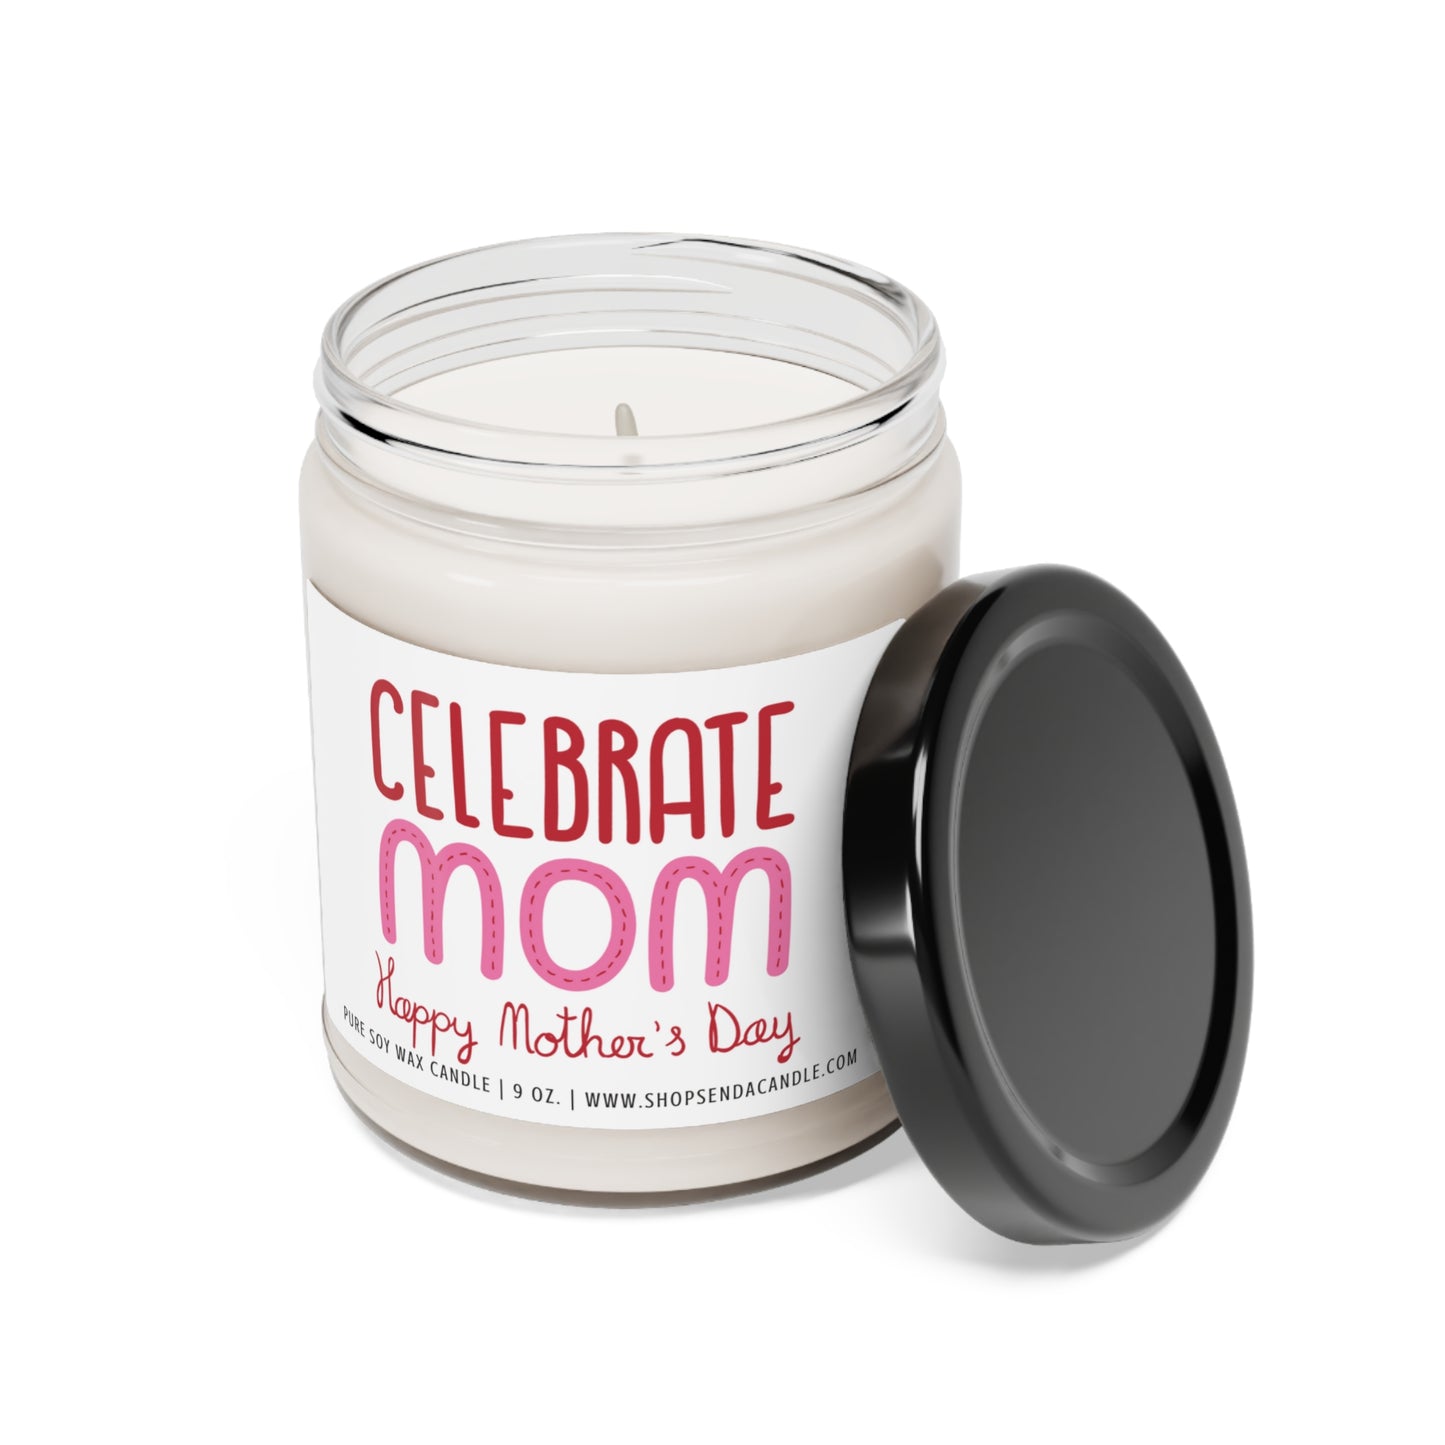 Last Minute Mothers Day Gifts